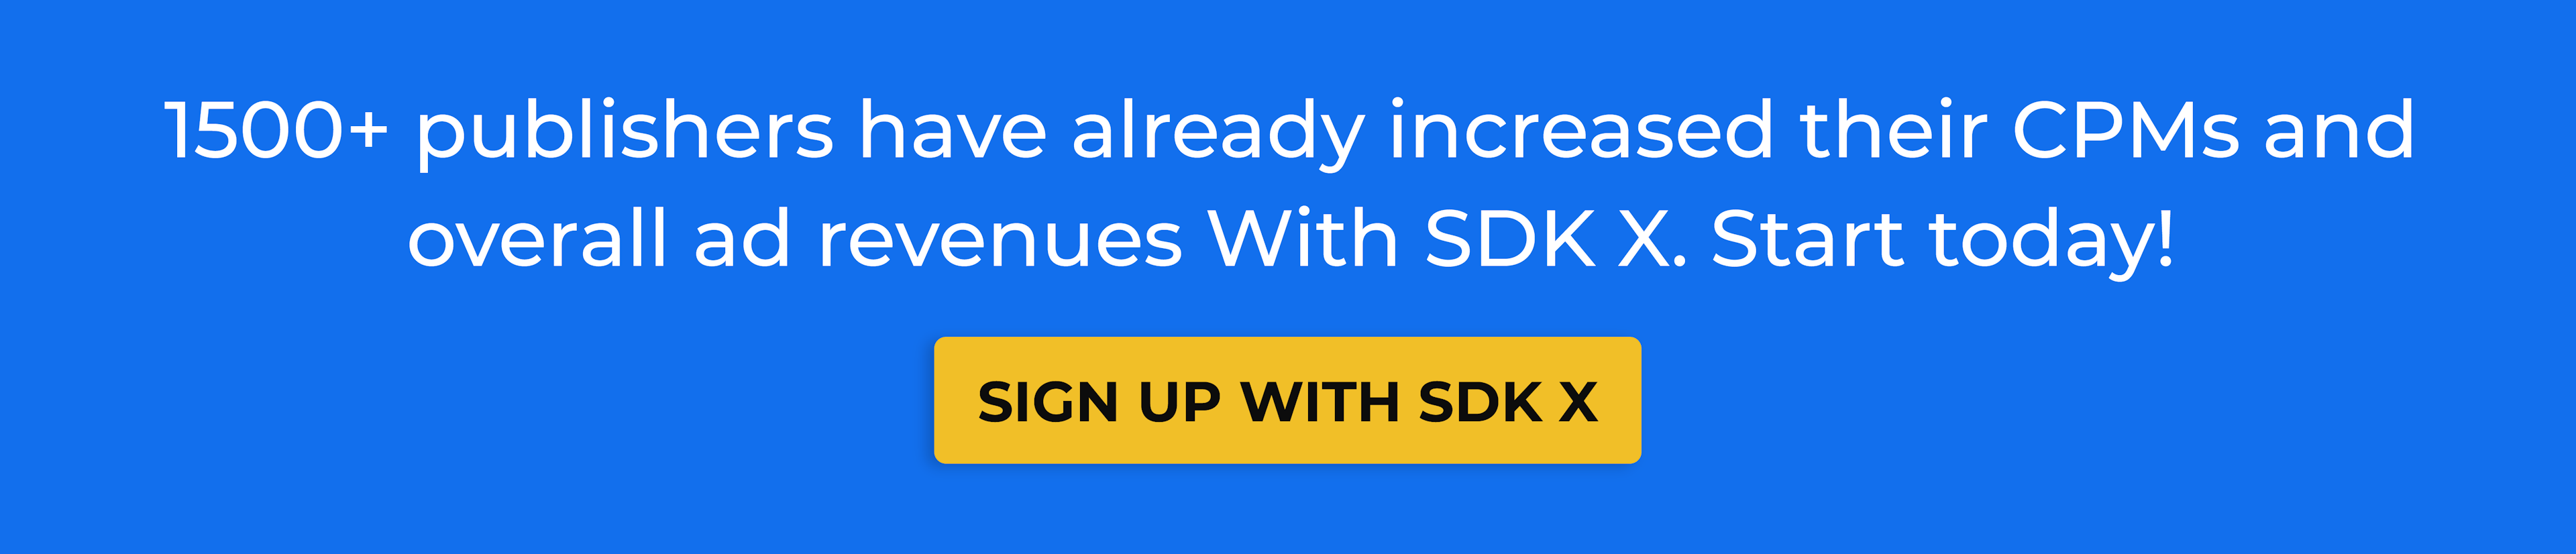 Sign up with SDK X